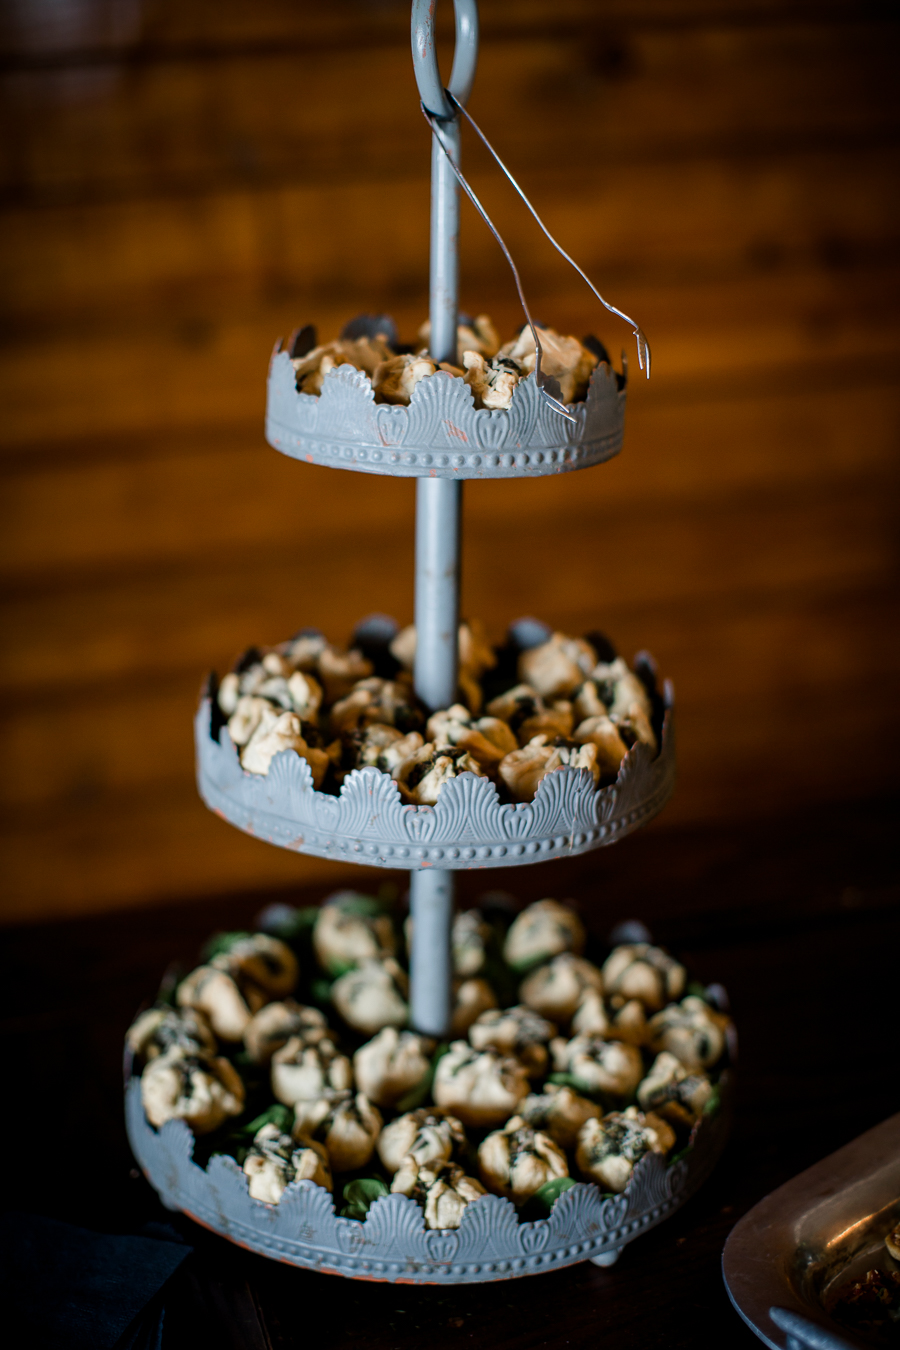 Creative Catering appetizer at the open house of Knoxville Wedding Venue, Hunter Valley Farm, by Knoxville Wedding Photographer, Amanda May Photos.